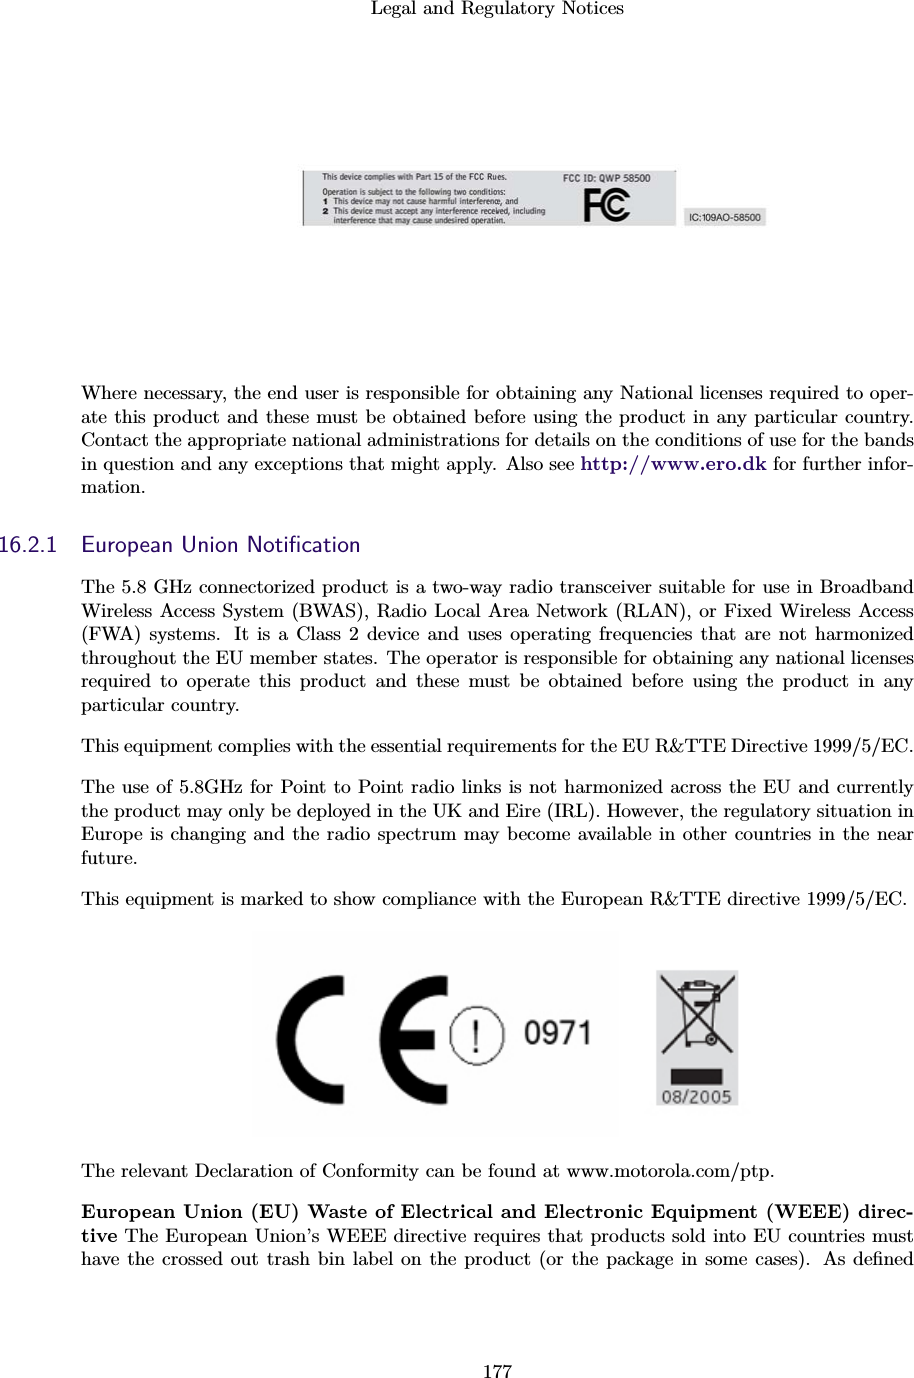 Legal and Regulatory Notices177Where necessary, the end user is responsible for obtaining any National licenses required to oper-ate this product and these must be obtained before using the product in any particular country.Contact the appropriate national administrations for details on the conditions of use for the bandsin question and any exceptions that might apply. Also see http://www.ero.dk for further infor-mation.16.2.1 European Union NotiﬁcationThe 5.8 GHz connectorized product is a two-way radio transceiver suitable for use in BroadbandWireless Access System (BWAS), Radio Local Area Network (RLAN), or Fixed Wireless Access(FWA) systems. It is a Class 2 device and uses operating frequencies that are not harmonizedthroughout the EU member states. The operator is responsible for obtaining any national licensesrequired to operate this product and these must be obtained before using the product in anyparticular country.This equipment complies with the essential requirements for the EU R&amp;TTE Directive 1999/5/EC.The use of 5.8GHz for Point to Point radio links is not harmonized across the EU and currentlythe product may only be deployed in the UK and Eire (IRL). However, the regulatory situation inEurope is changing and the radio spectrum may become available in other countries in the nearfuture.This equipment is marked to show compliance with the European R&amp;TTE directive 1999/5/EC.The relevant Declaration of Conformity can be found at www.motorola.com/ptp.European Union (EU) Waste of Electrical and Electronic Equipment (WEEE) direc-tive The European Union’s WEEE directive requires that products sold into EU countries musthave the crossed out trash bin label on the product (or the package in some cases). As deﬁned